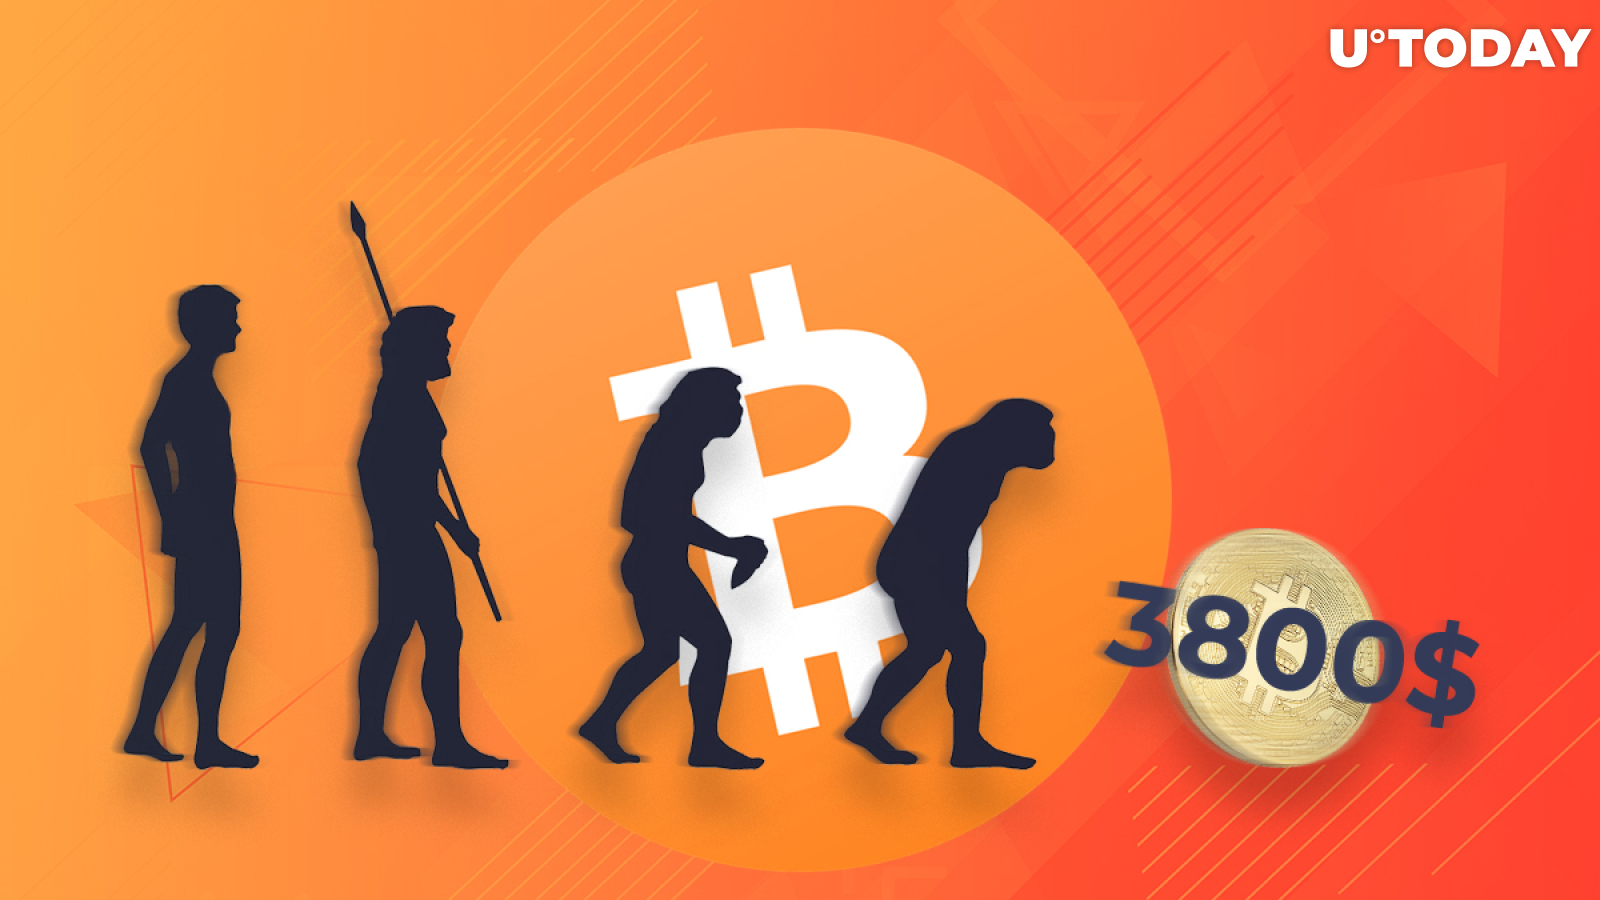 BTC Price Prediction: Dump to $3,800 Seems to Be Inevitable. Are Bulls Giving Up?